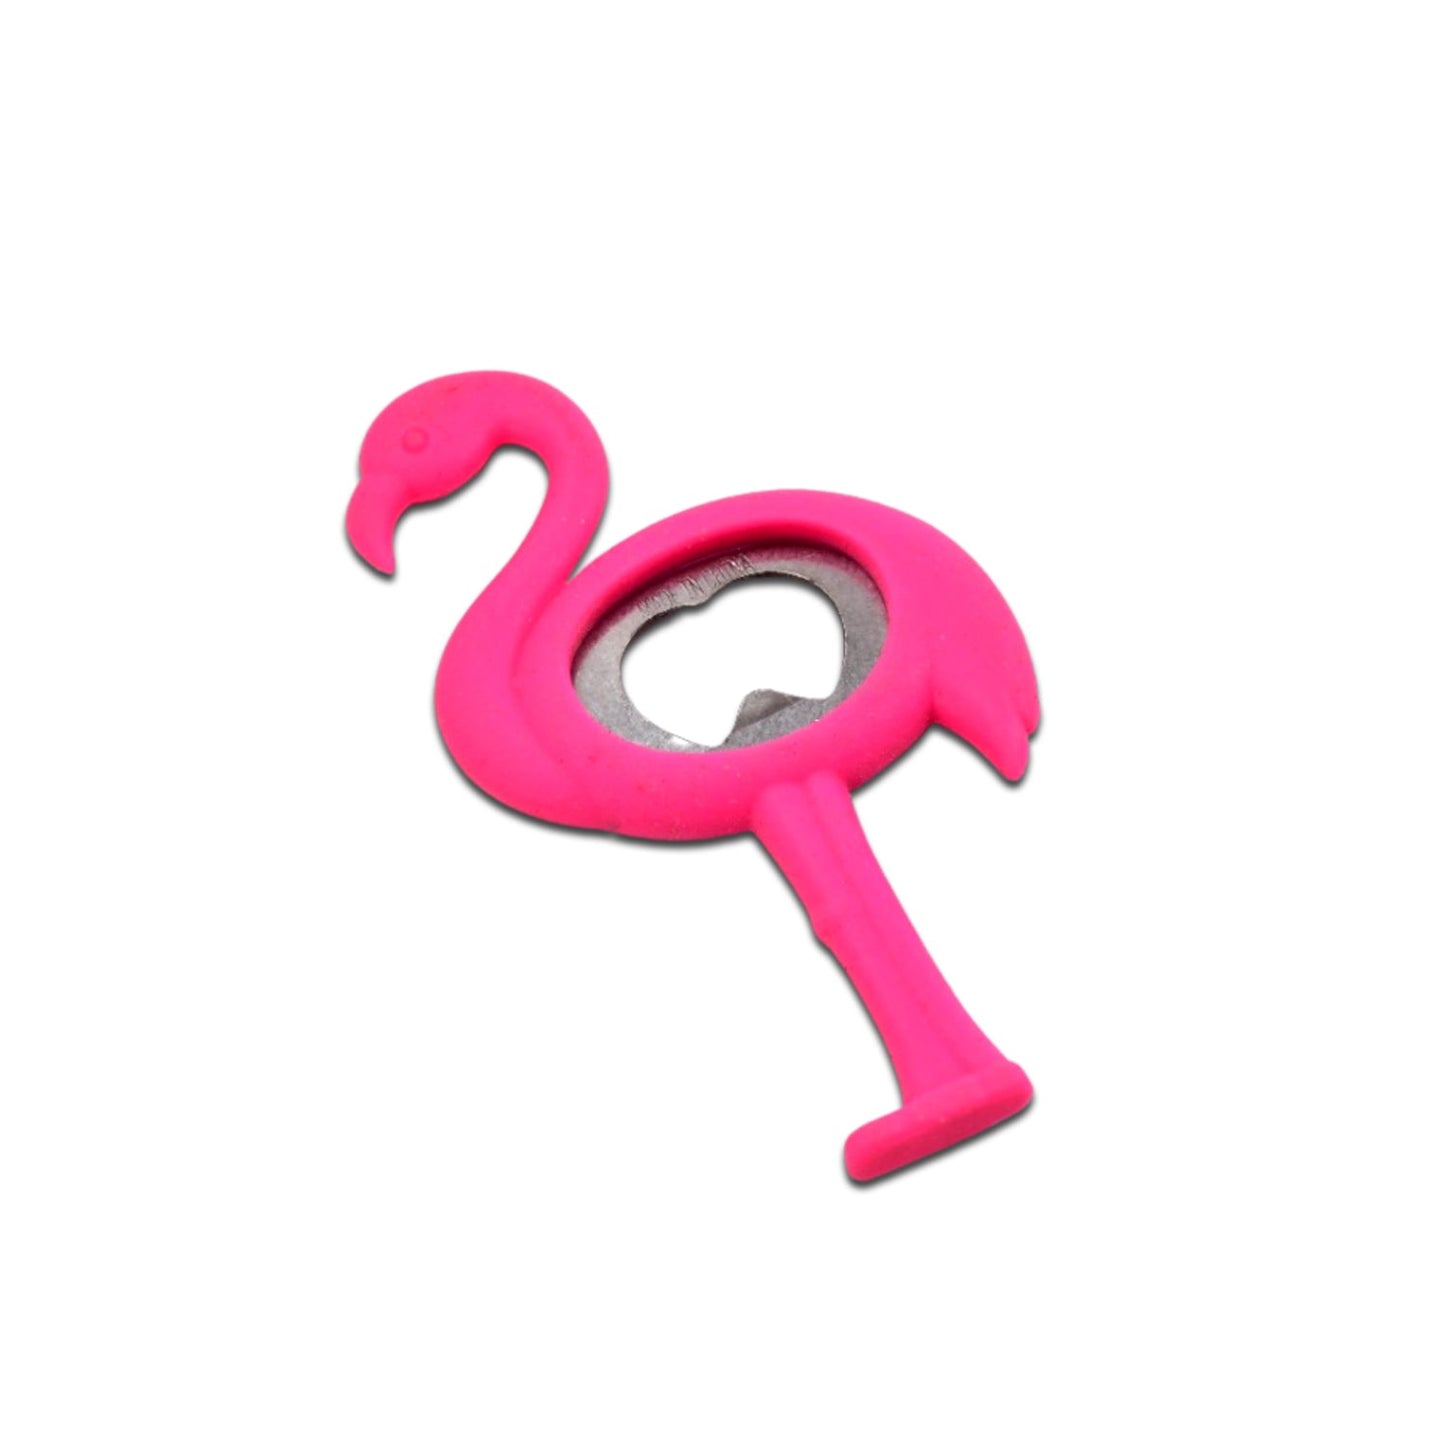 2747 Flamingo Novelty Bottle Opener - Ideal for Cocktail Parties - Made from Silicone and Stainless Steel DeoDap